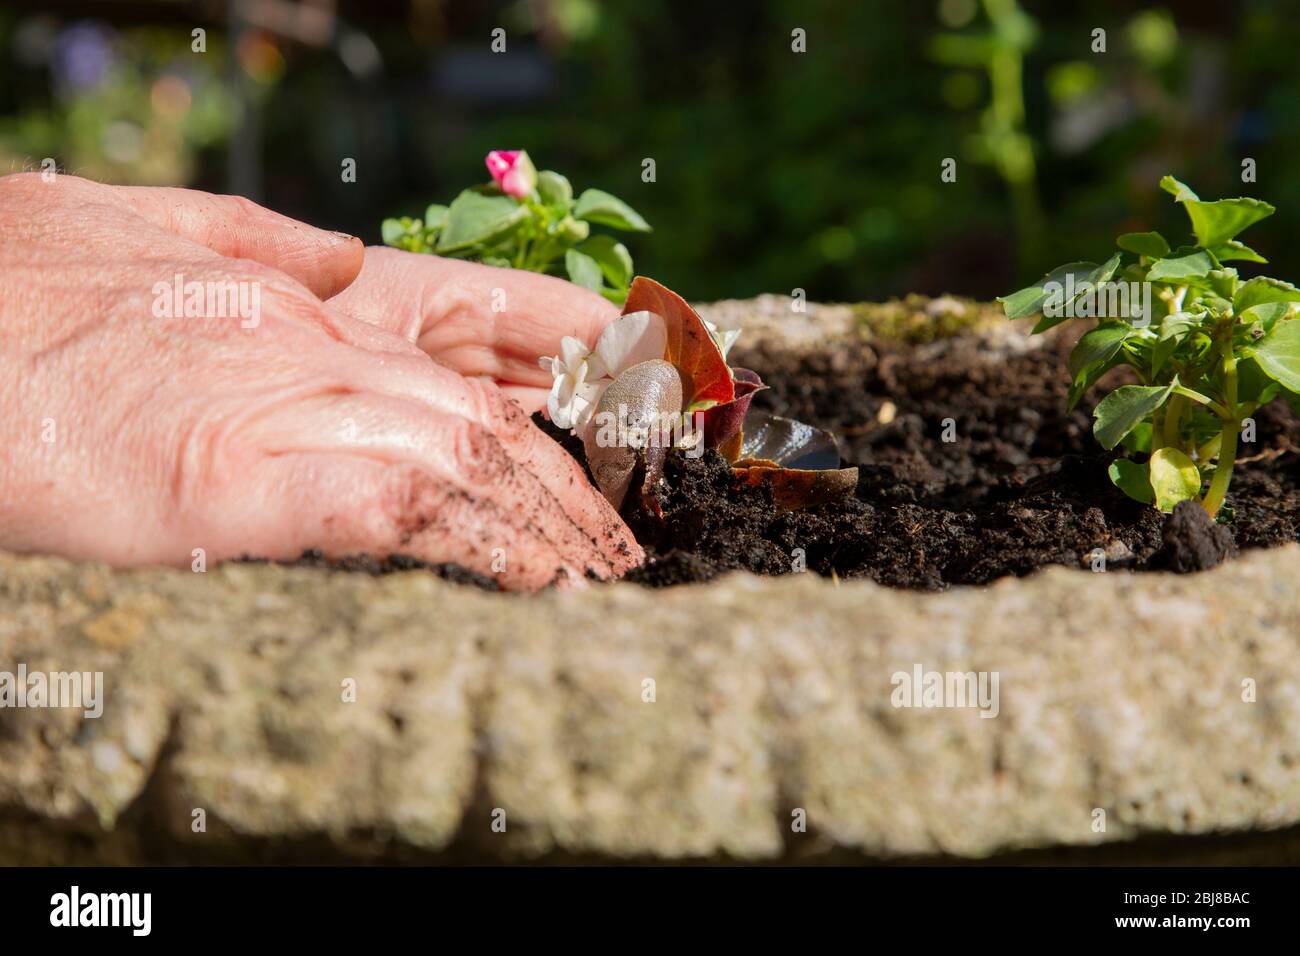 Man planting a begonia and impatiens bedding plant flower in a stone pot planter.  Gardening chore concept Stock Photo